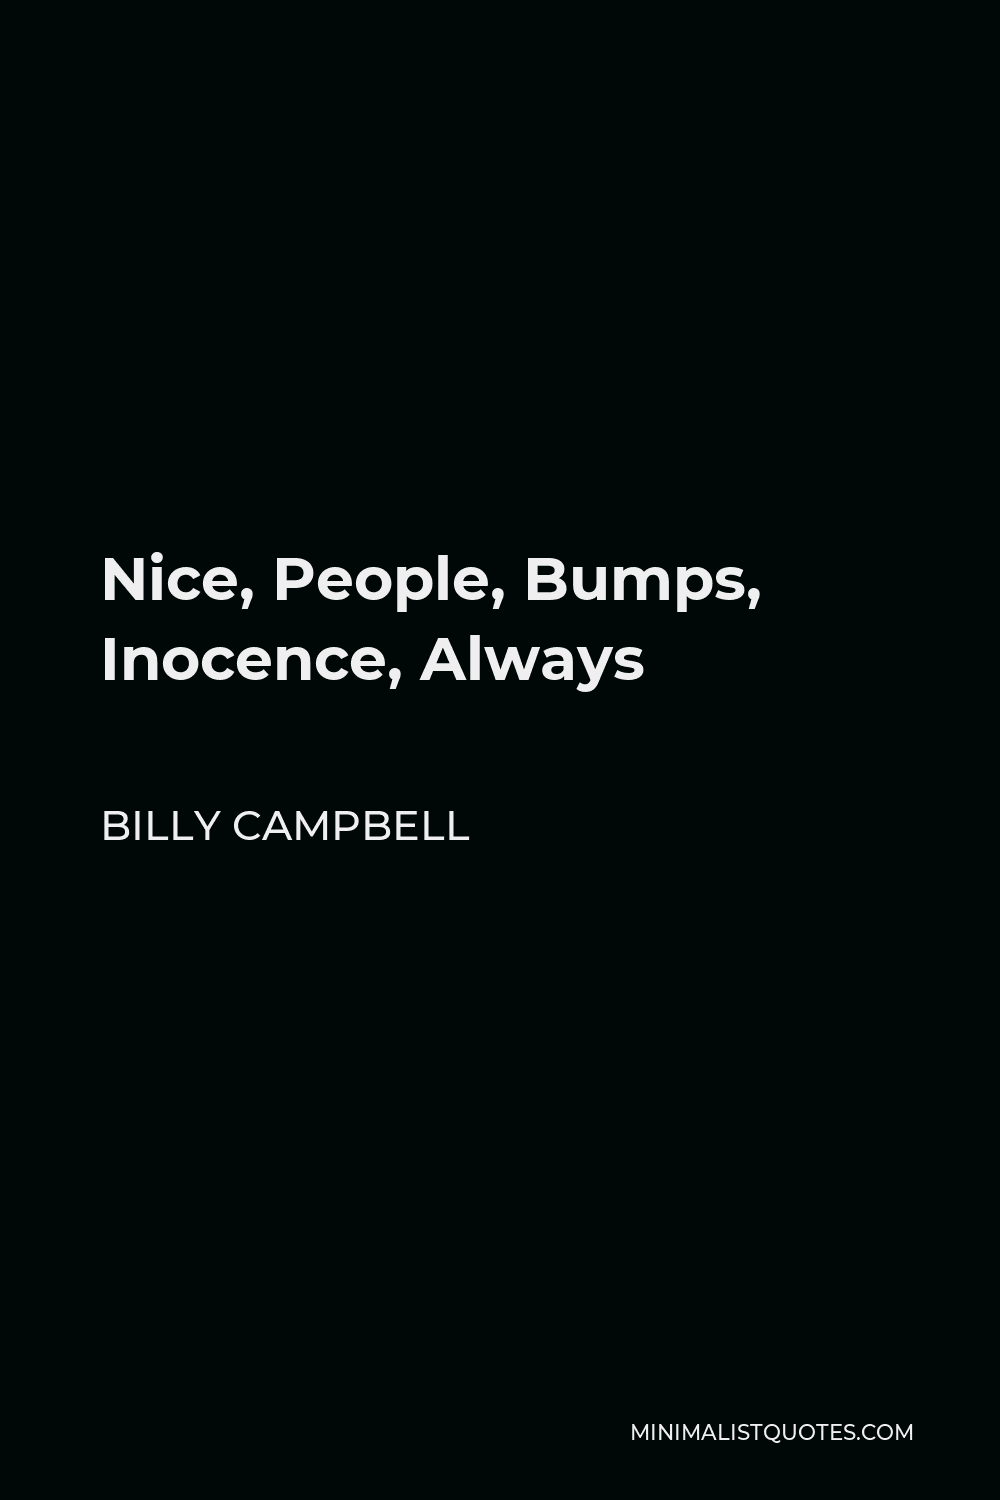 Billy Campbell Quote - Nice, People, Bumps, Inocence, Always